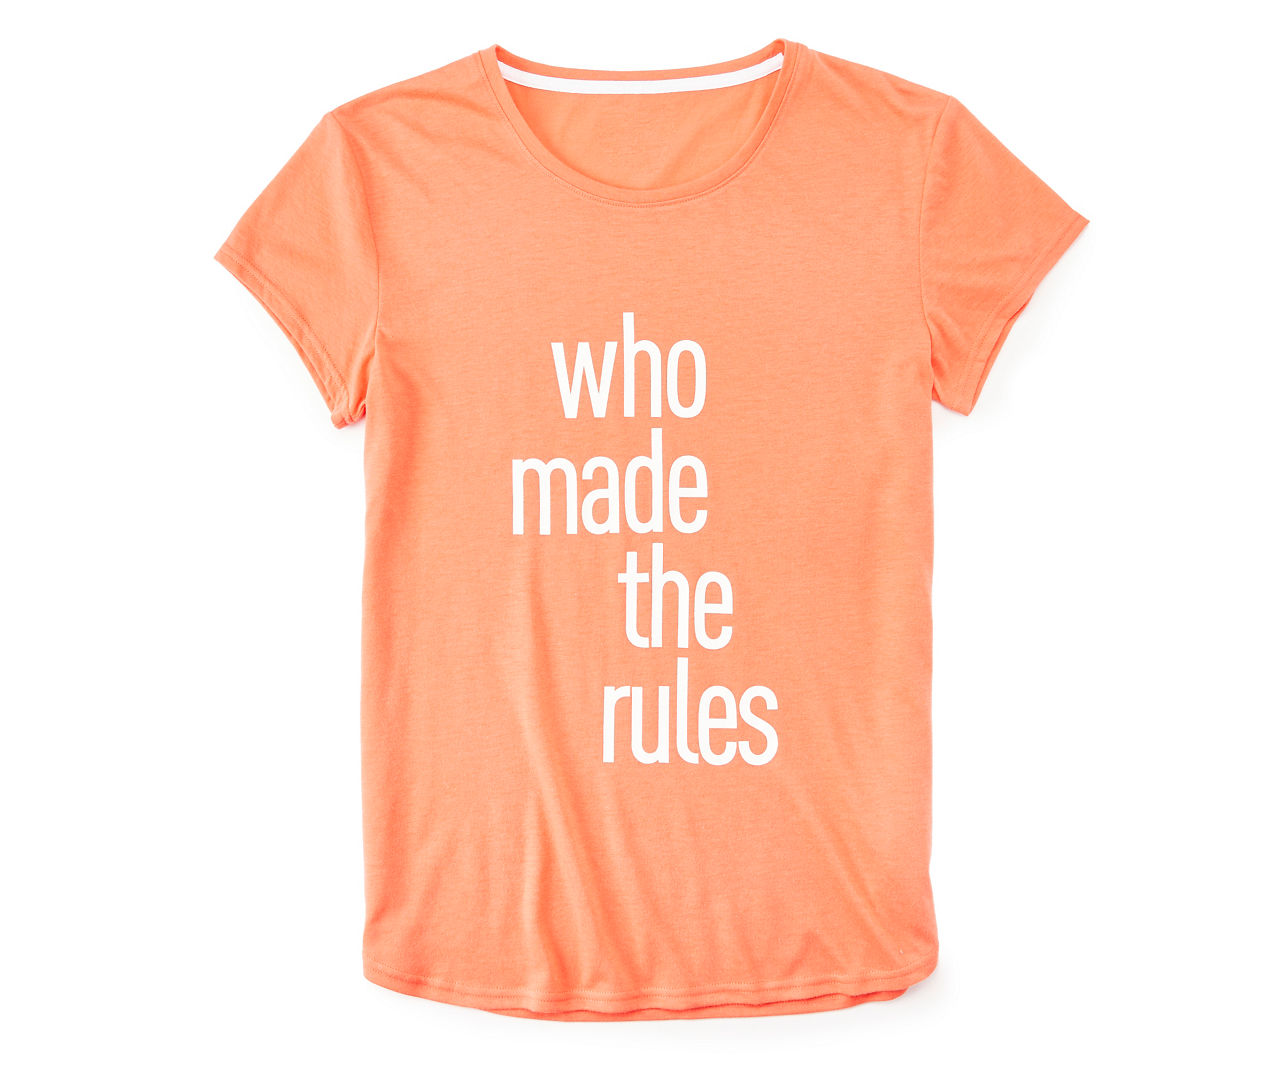 Women's XX-Large "Who Made the Rules" Graphic Tee